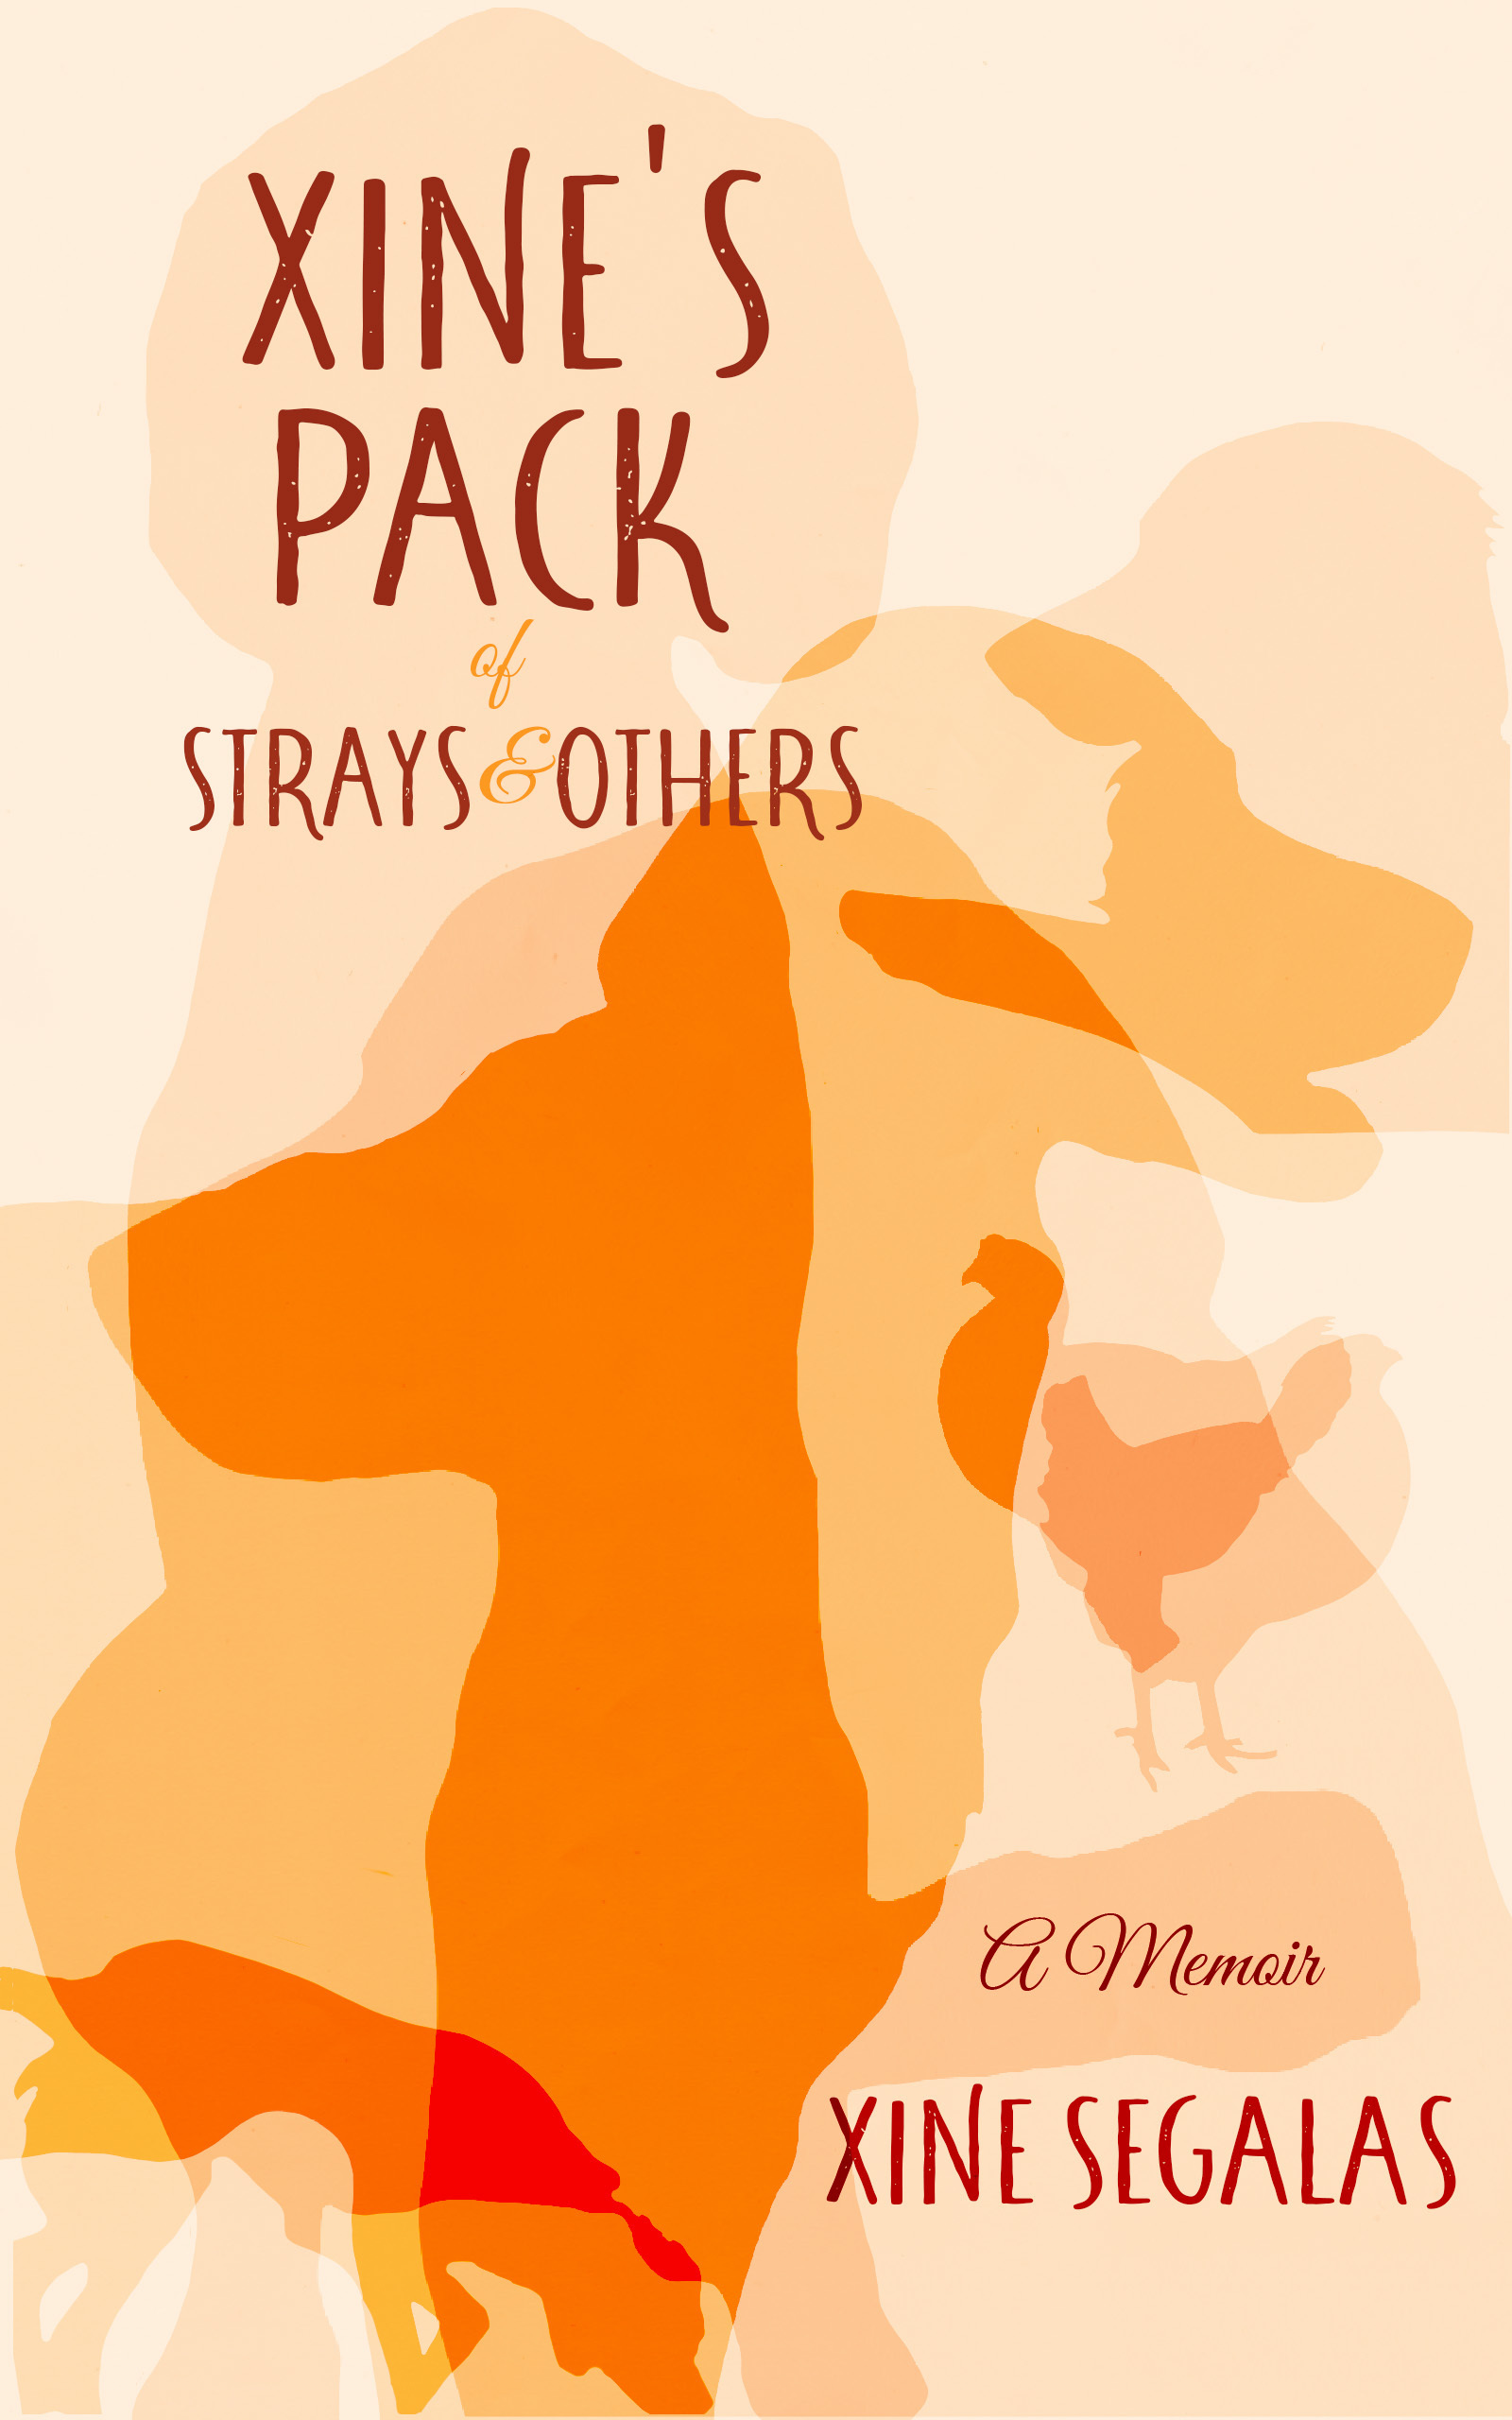 New book "Xine’s Pack of Strays & Others: A Memoir" by Xine Segalas is released, a heartwarming, often humorous collection of stories, lessons, and adventures of a lifetime spent with dogs